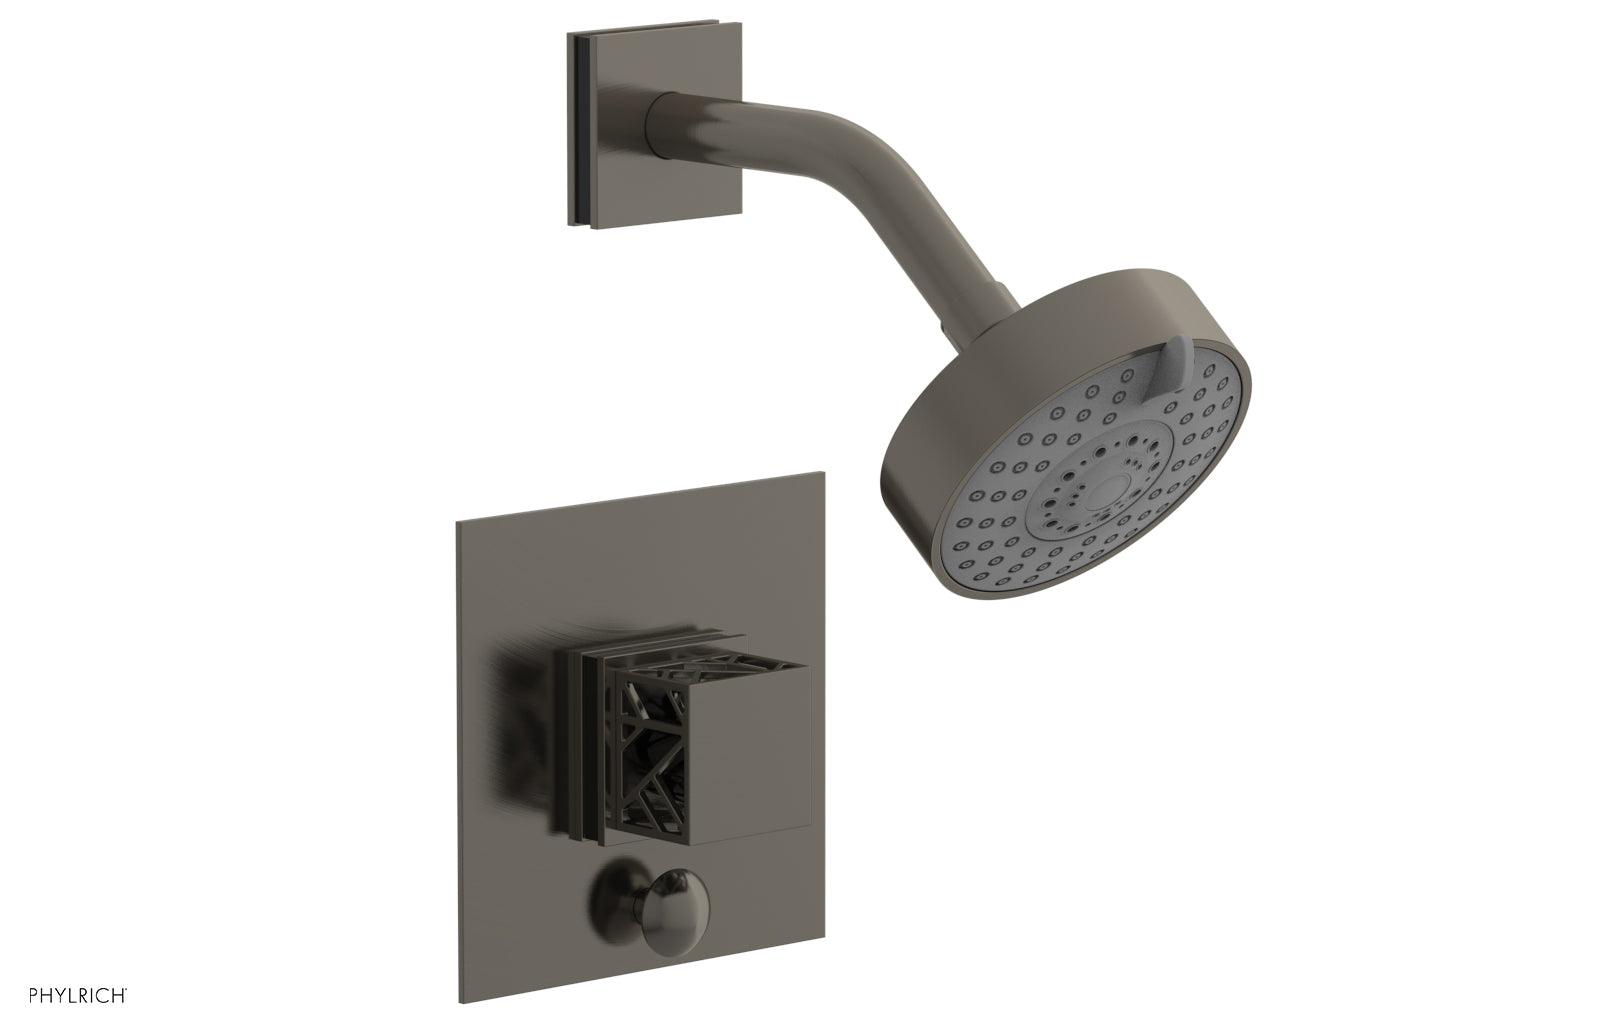 Phylrich JOLIE Pressure Balance Shower and Diverter Set (Less Spout), Square Handle with "Black" Accents